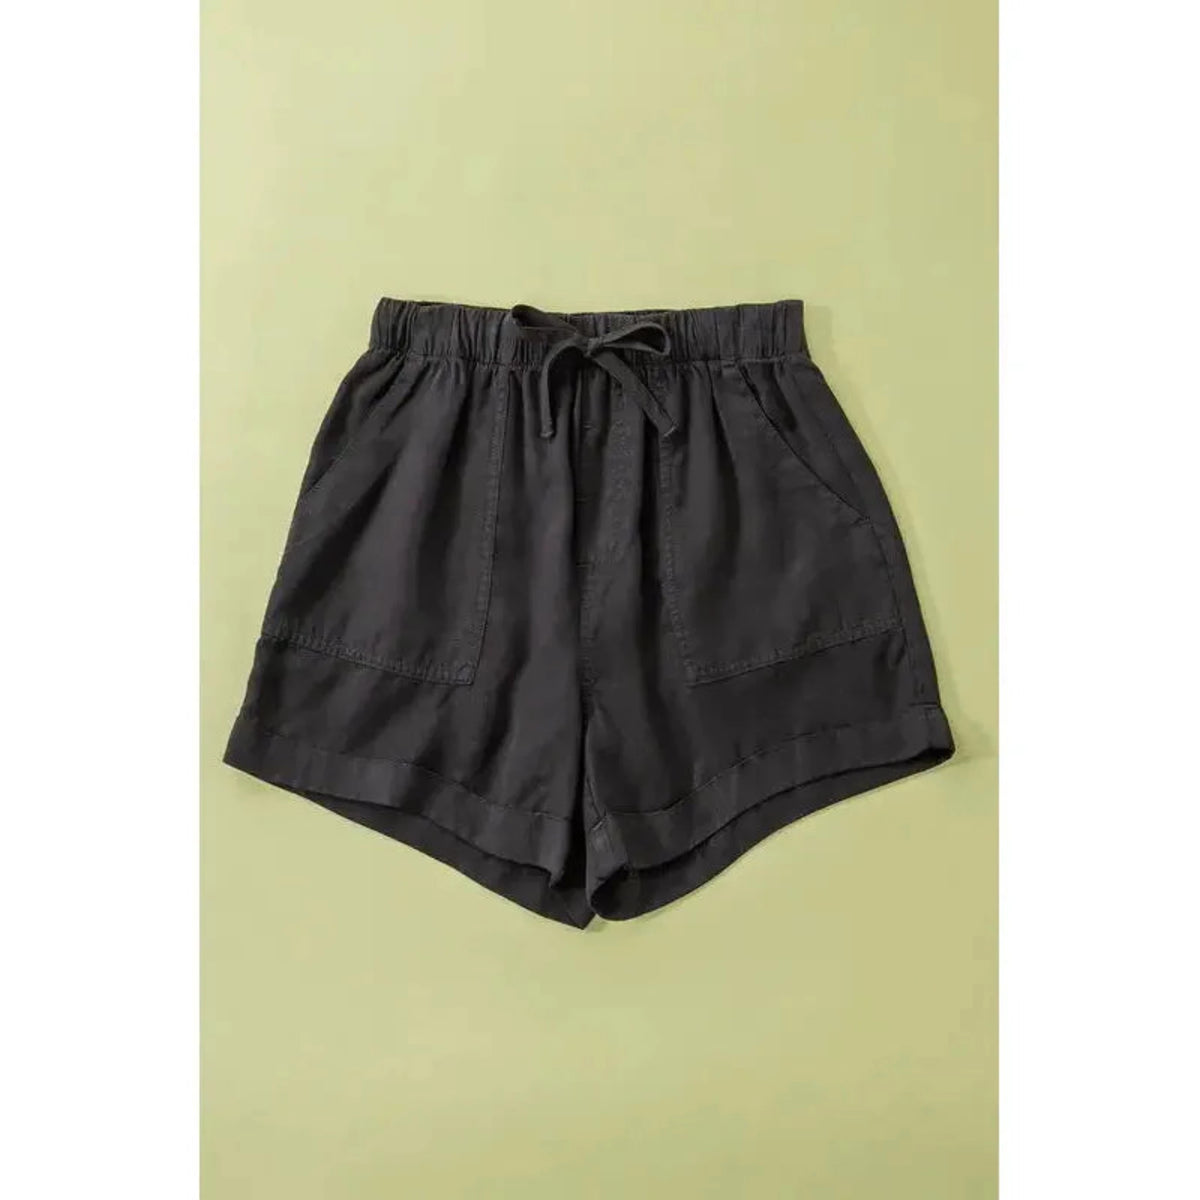 Patch pocket tencel summer shorts - womens clothing